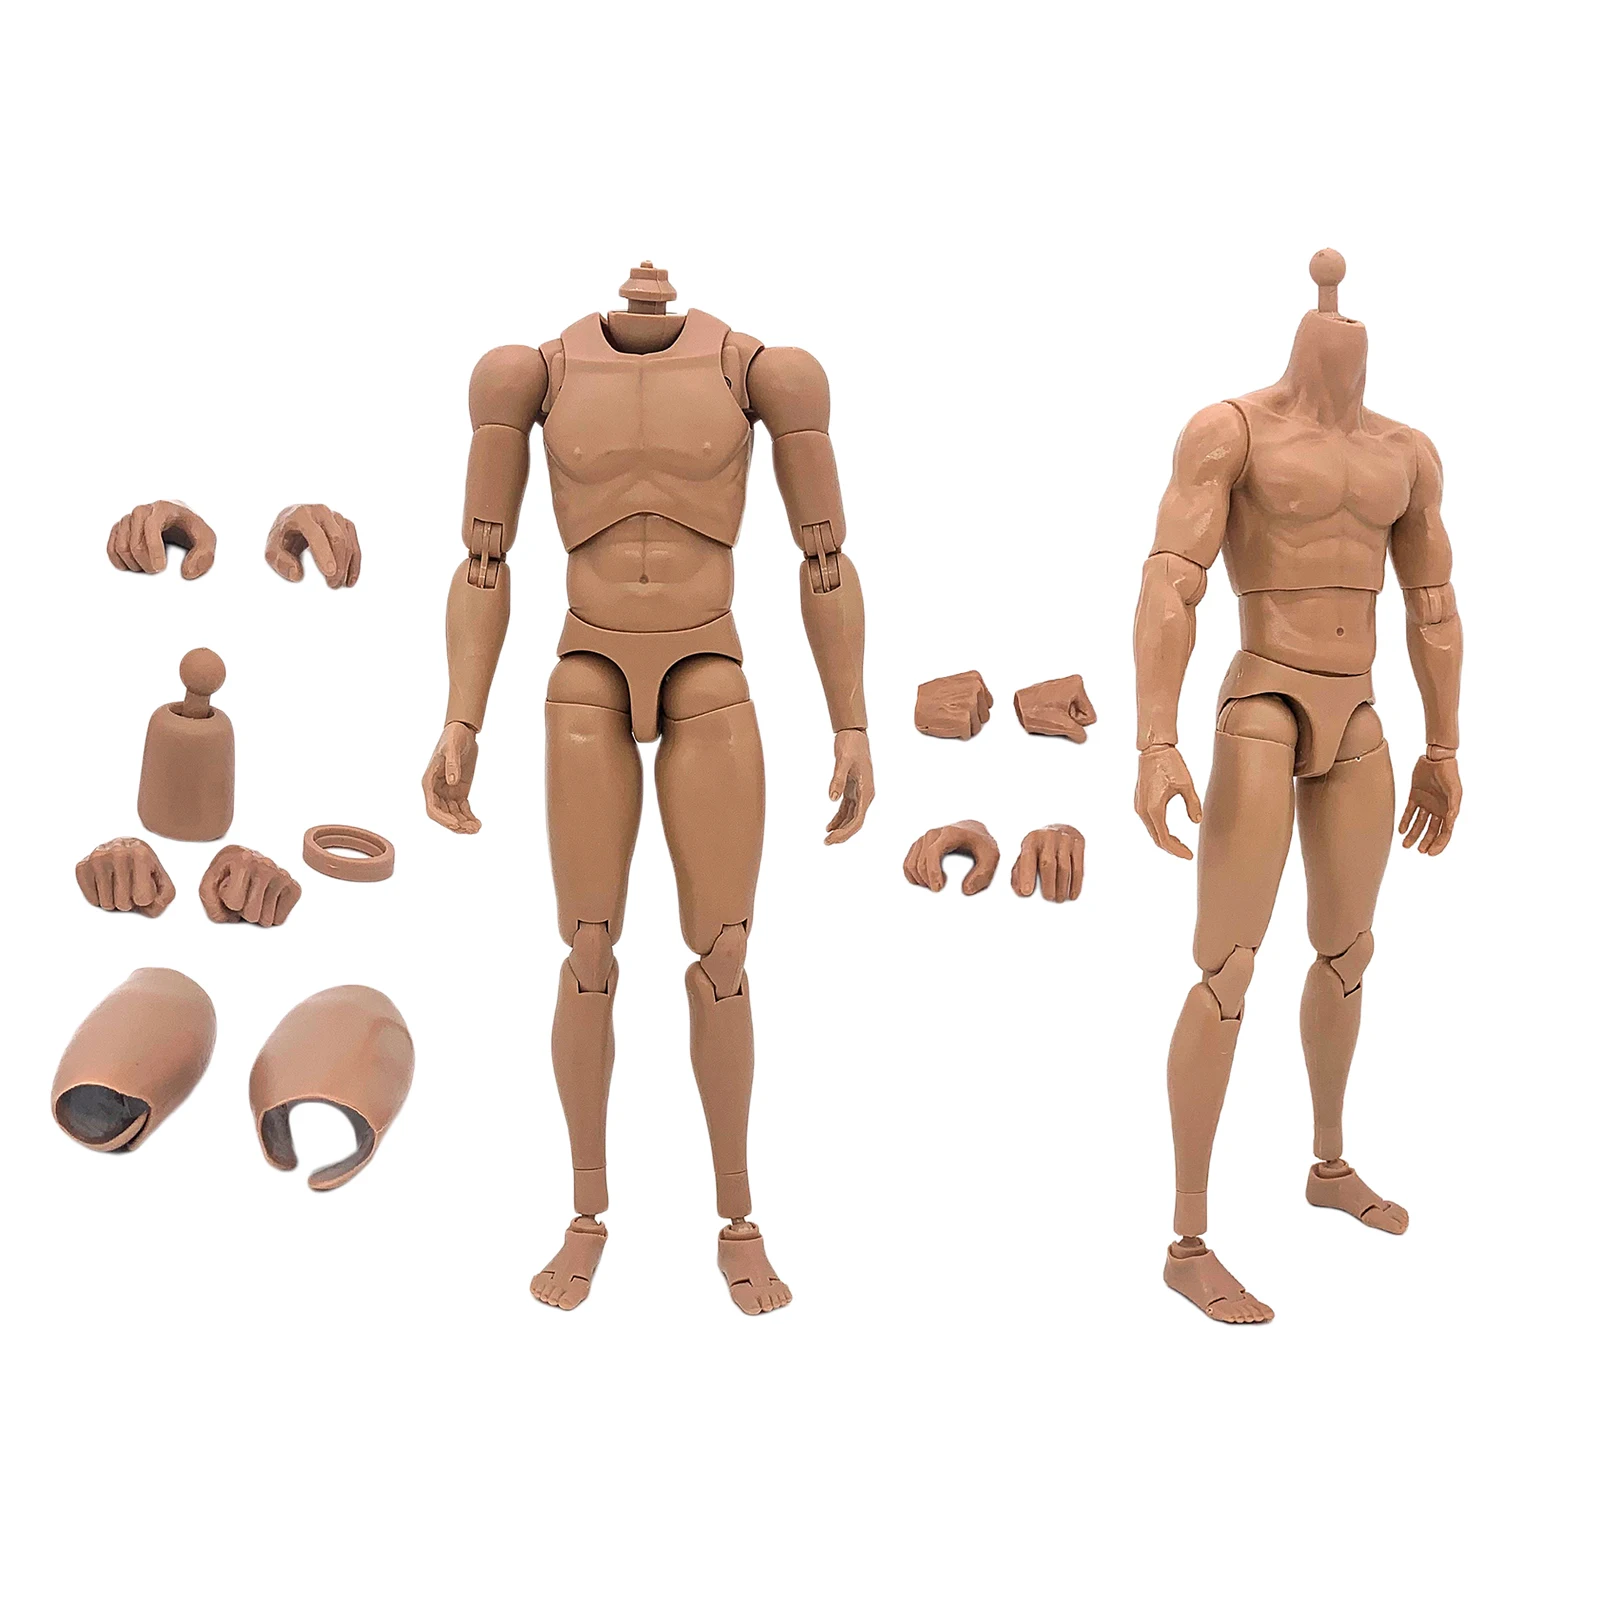 PVC 1/6 Action Figure Narrow Shoulder Male Muscular Man Skeleton Hands Connector Photography Head Sculpture Naked Body